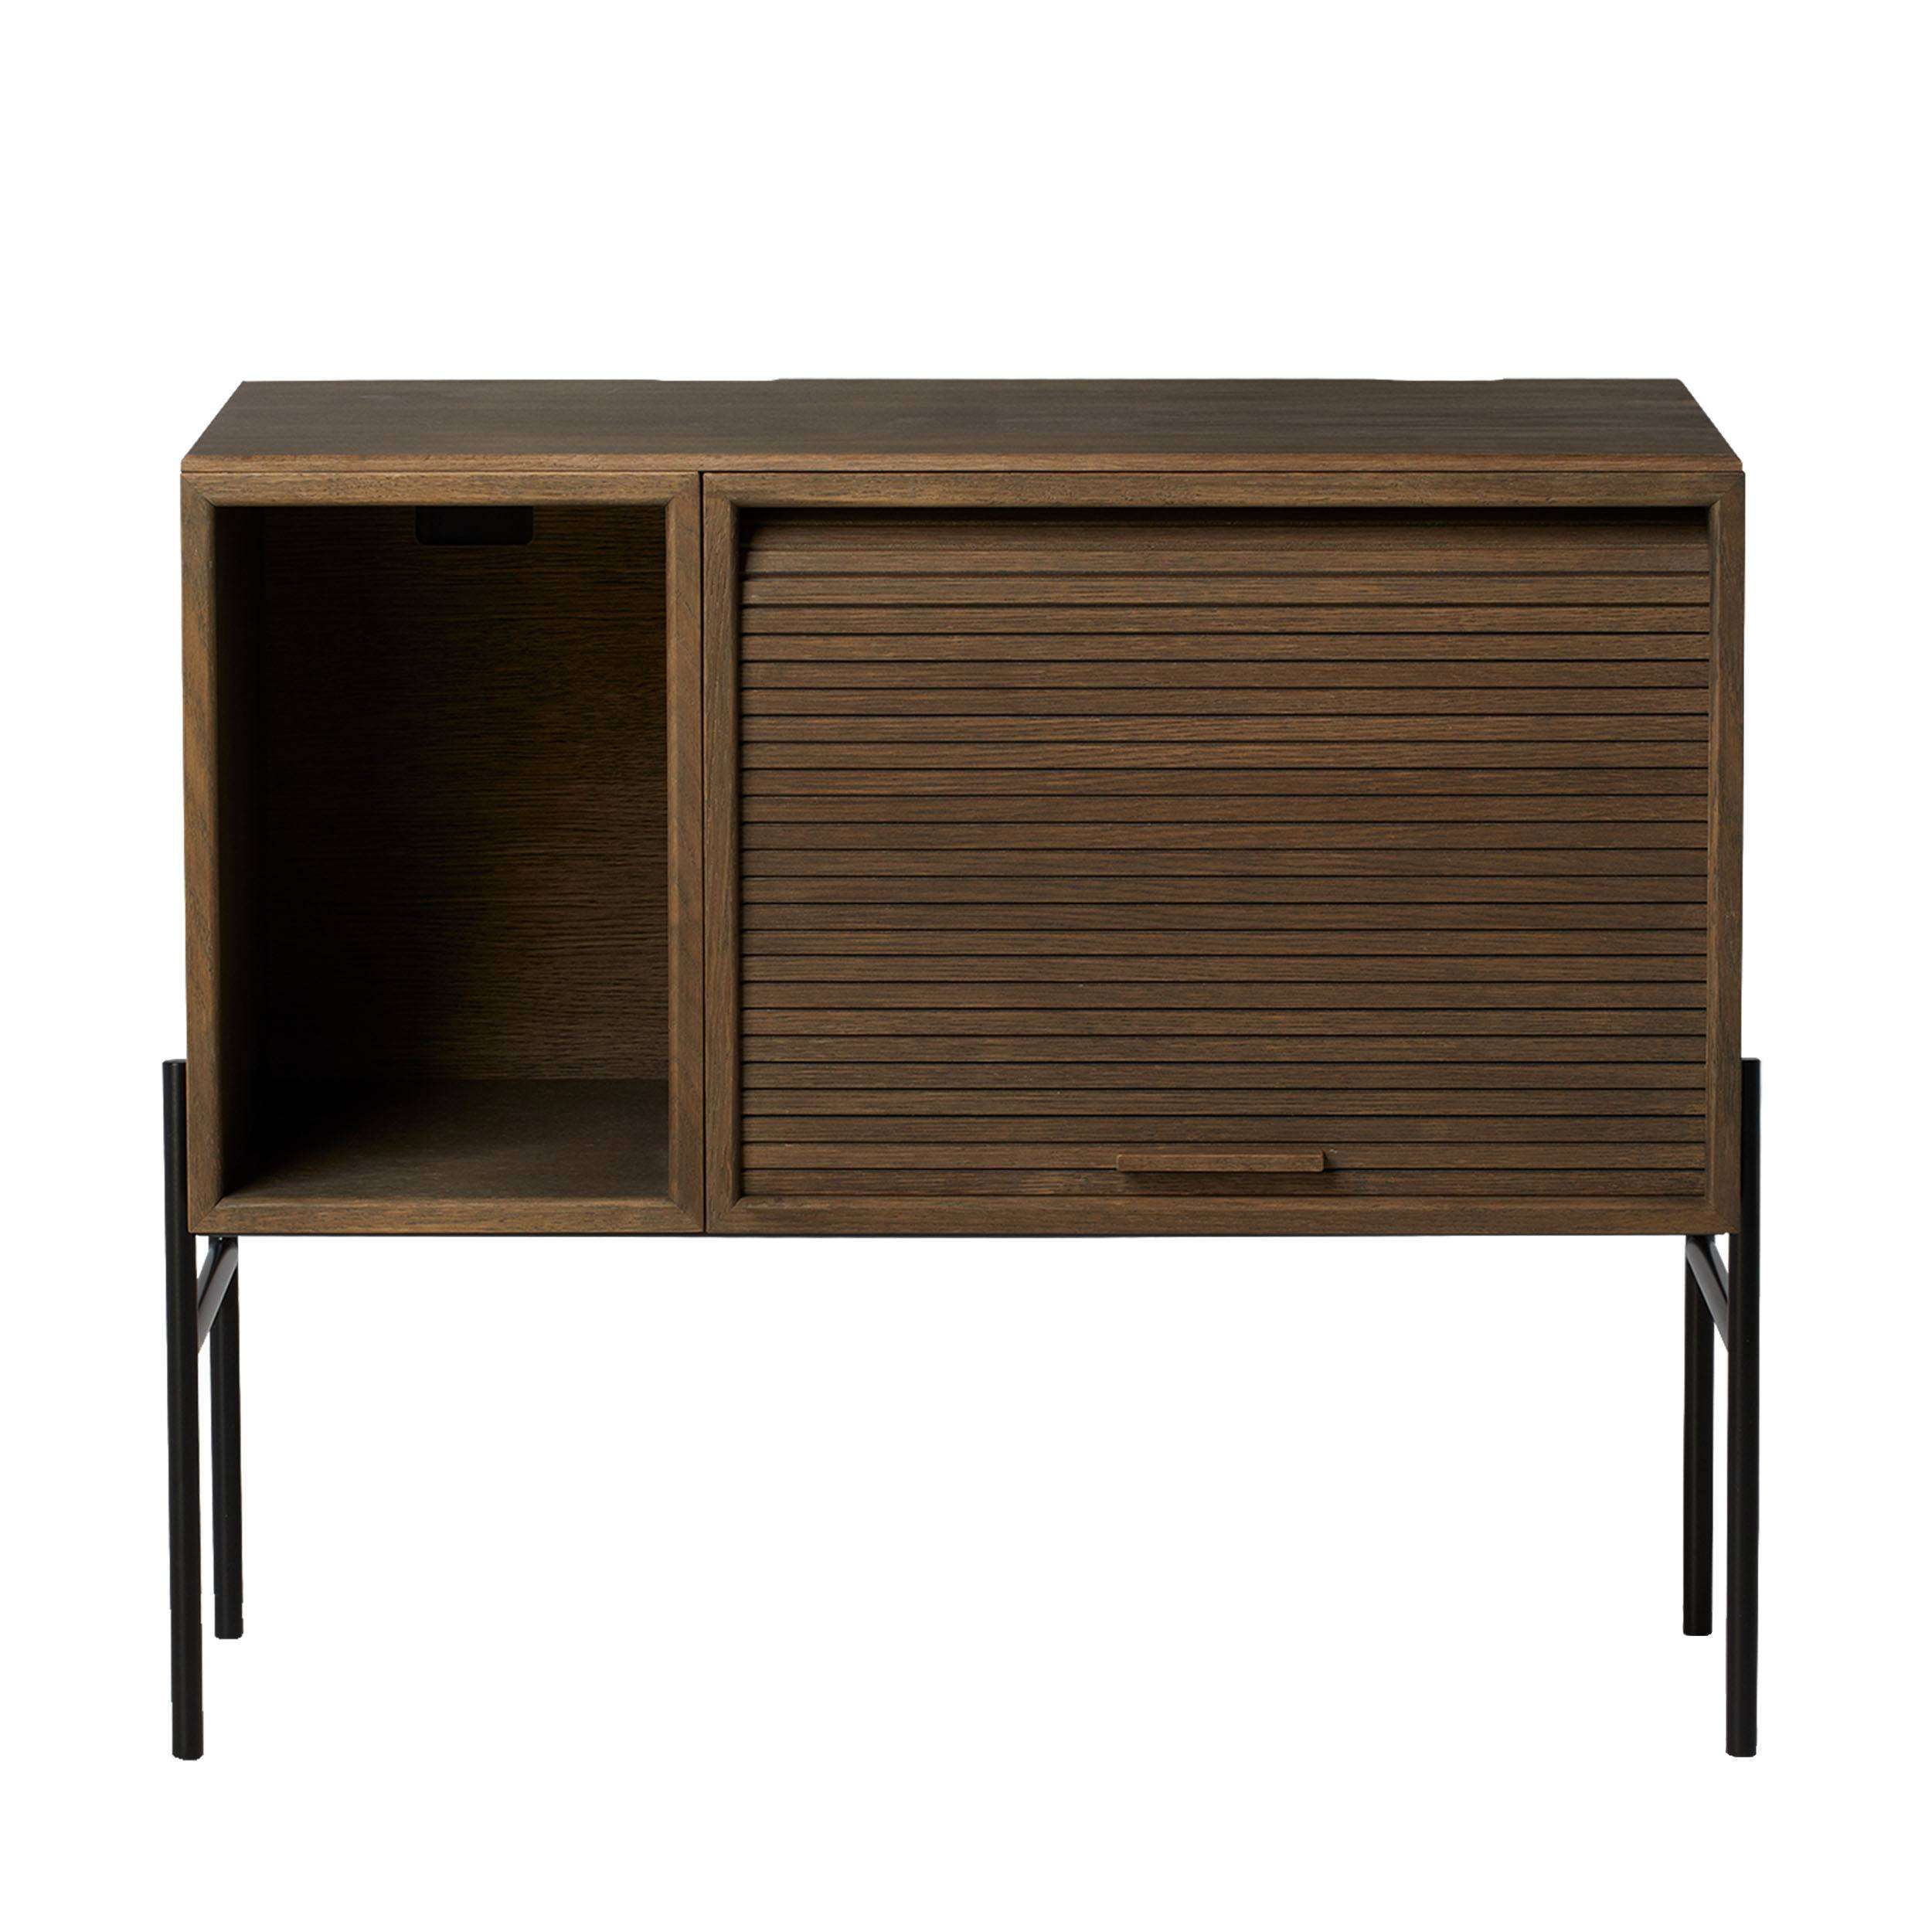 Hifive Media Sideboard 75 Gerä|uchert Intended For Castelli Sideboards (View 12 of 30)